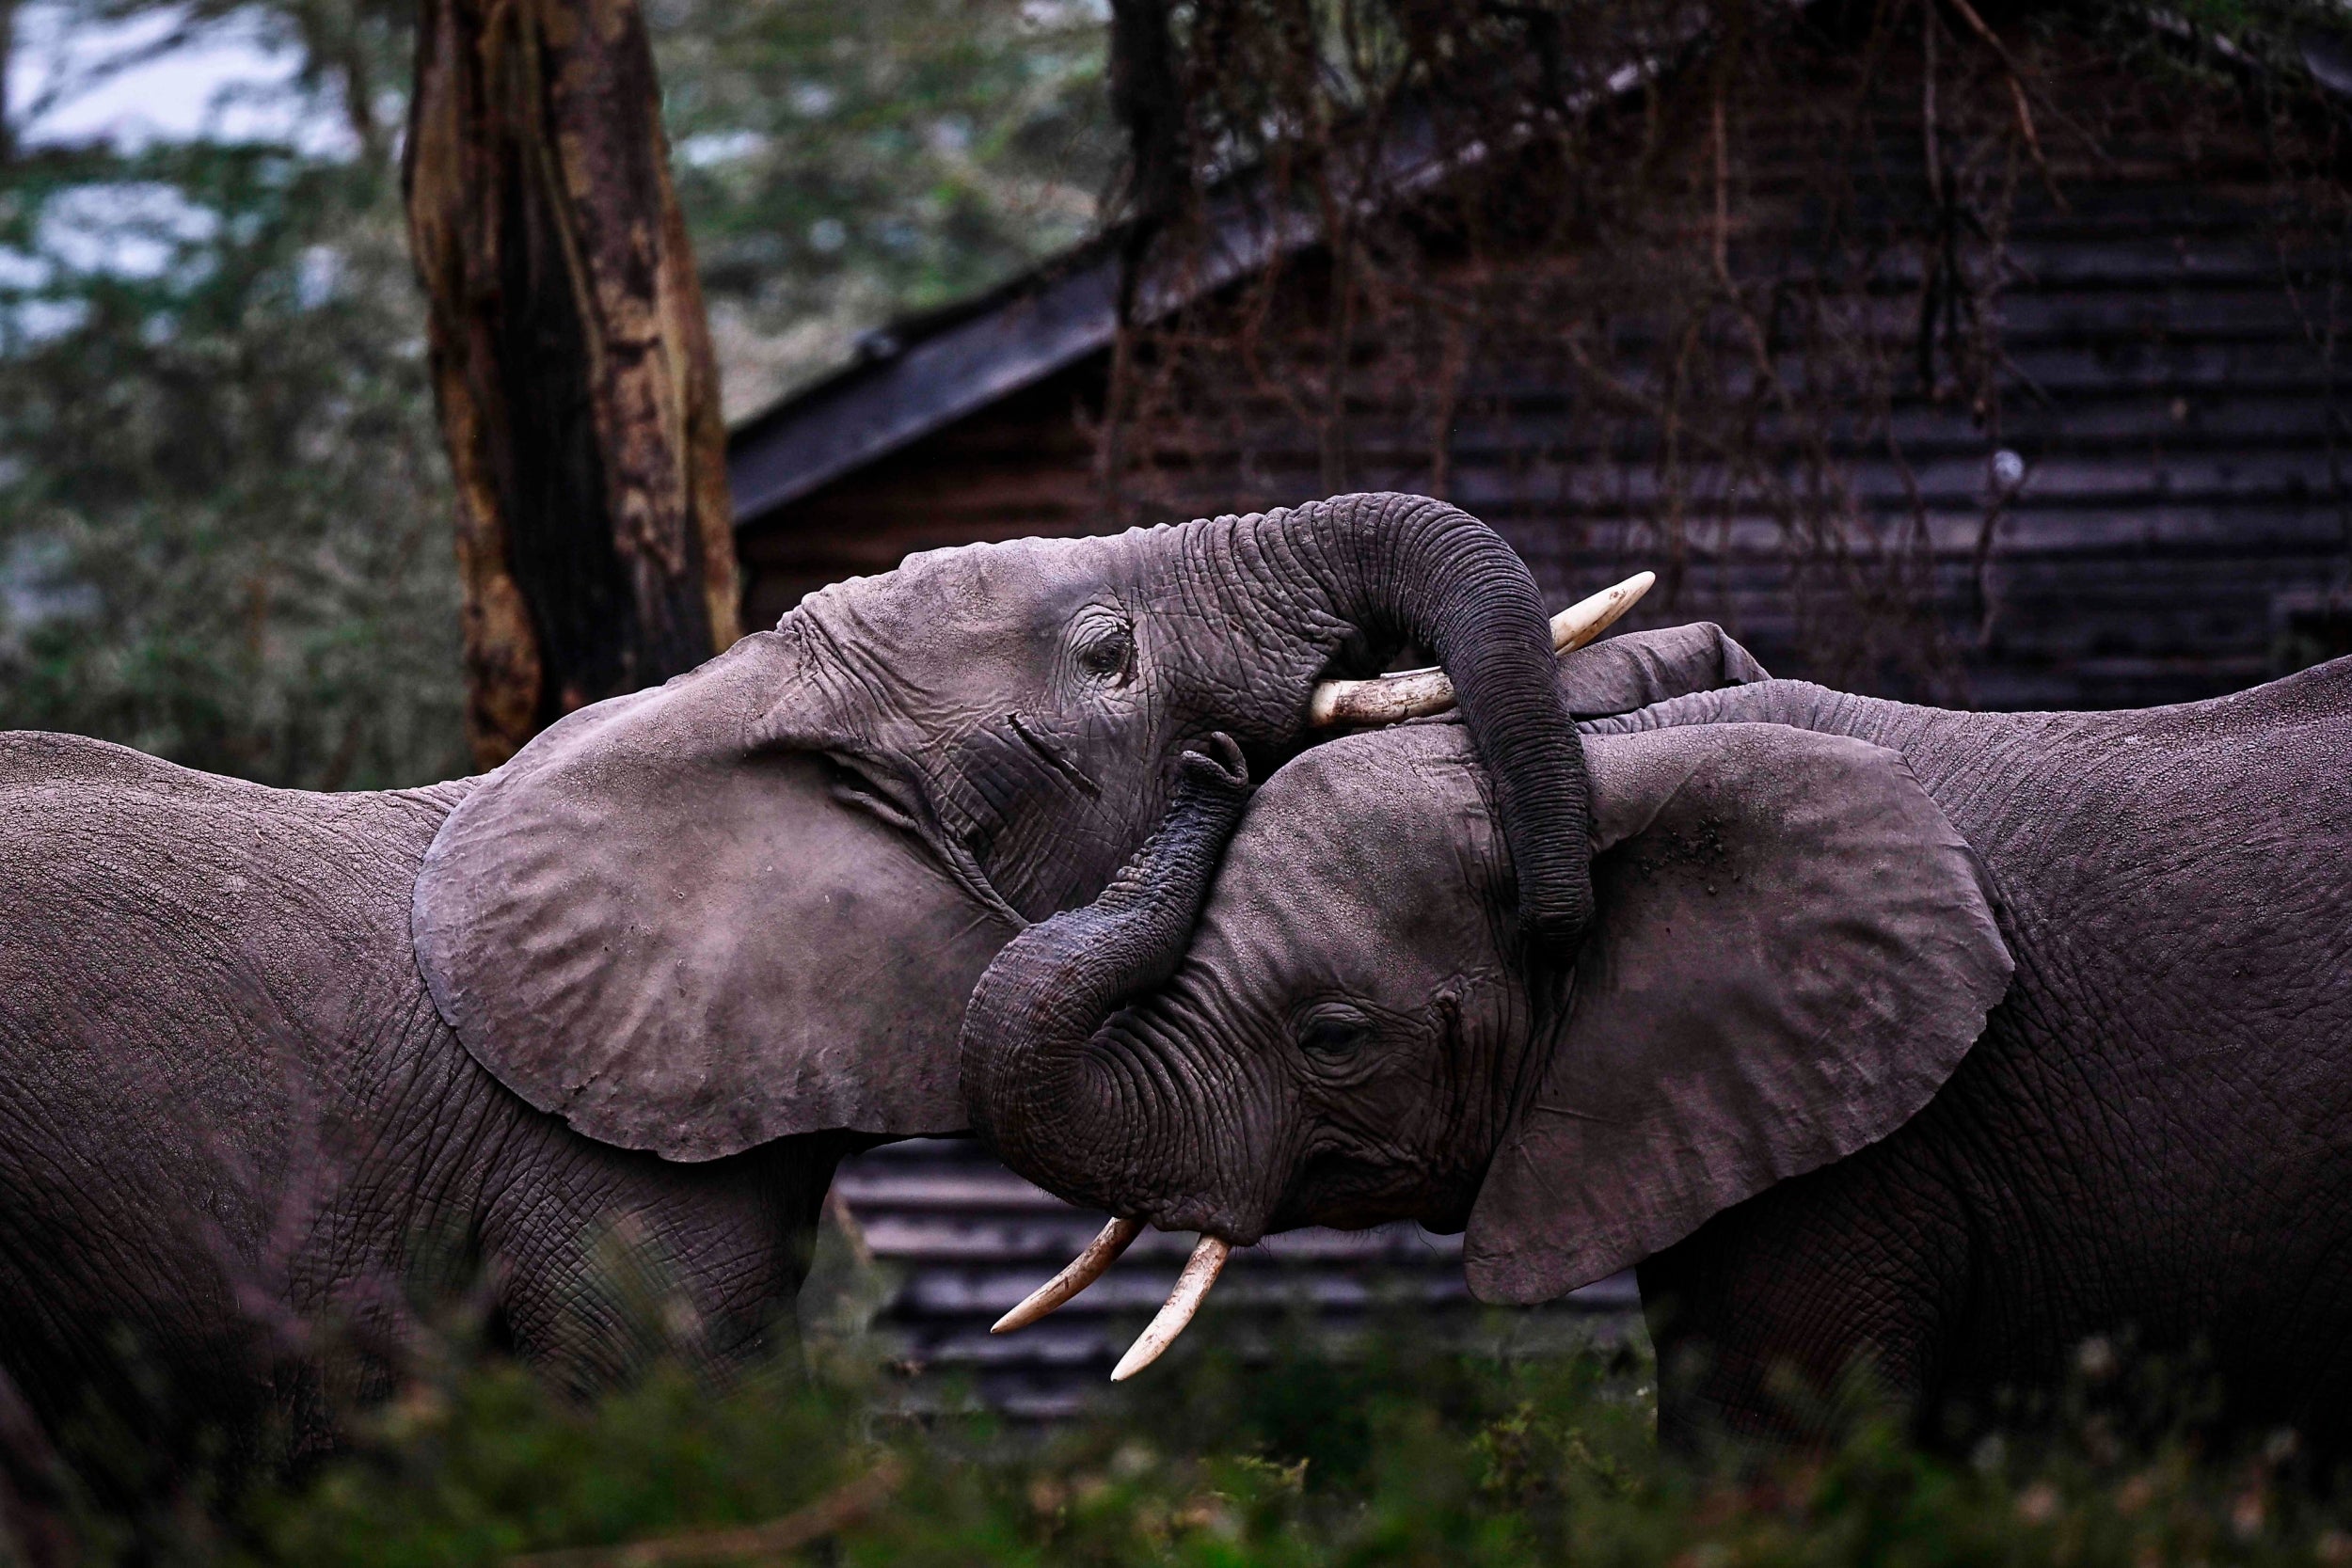 Two elephants comfort one another in a zoo near Nairobi, Kenya